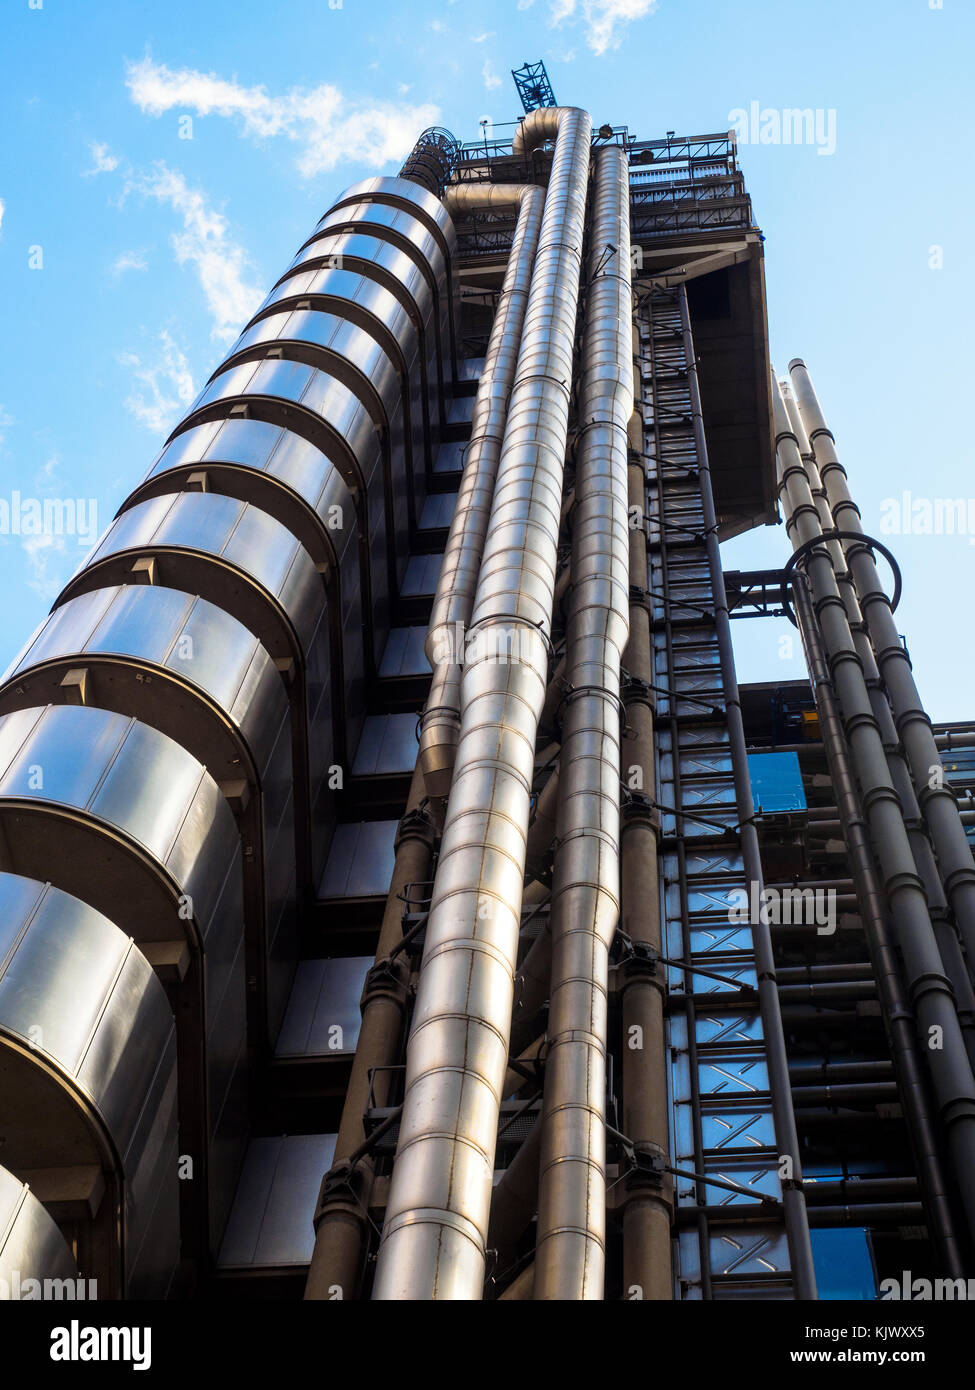 Architectural detail of The Lloyds of London Building - London, England Stock Photo